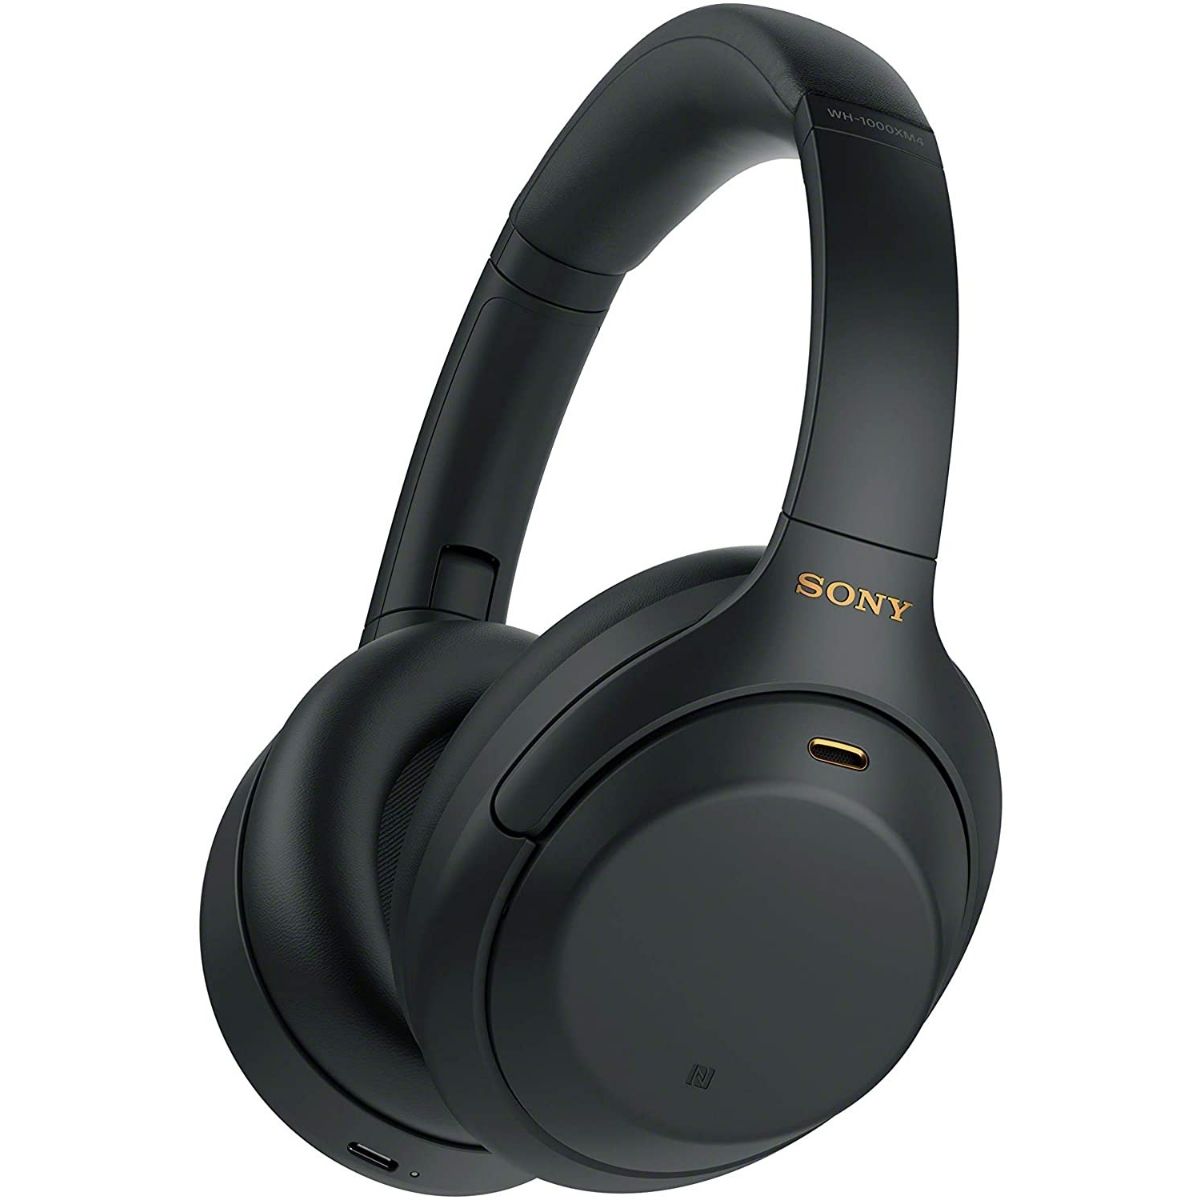 The Best Home Office Gifts Option: Sony WH-1000XM4 Wireless Noise Canceling Headphones